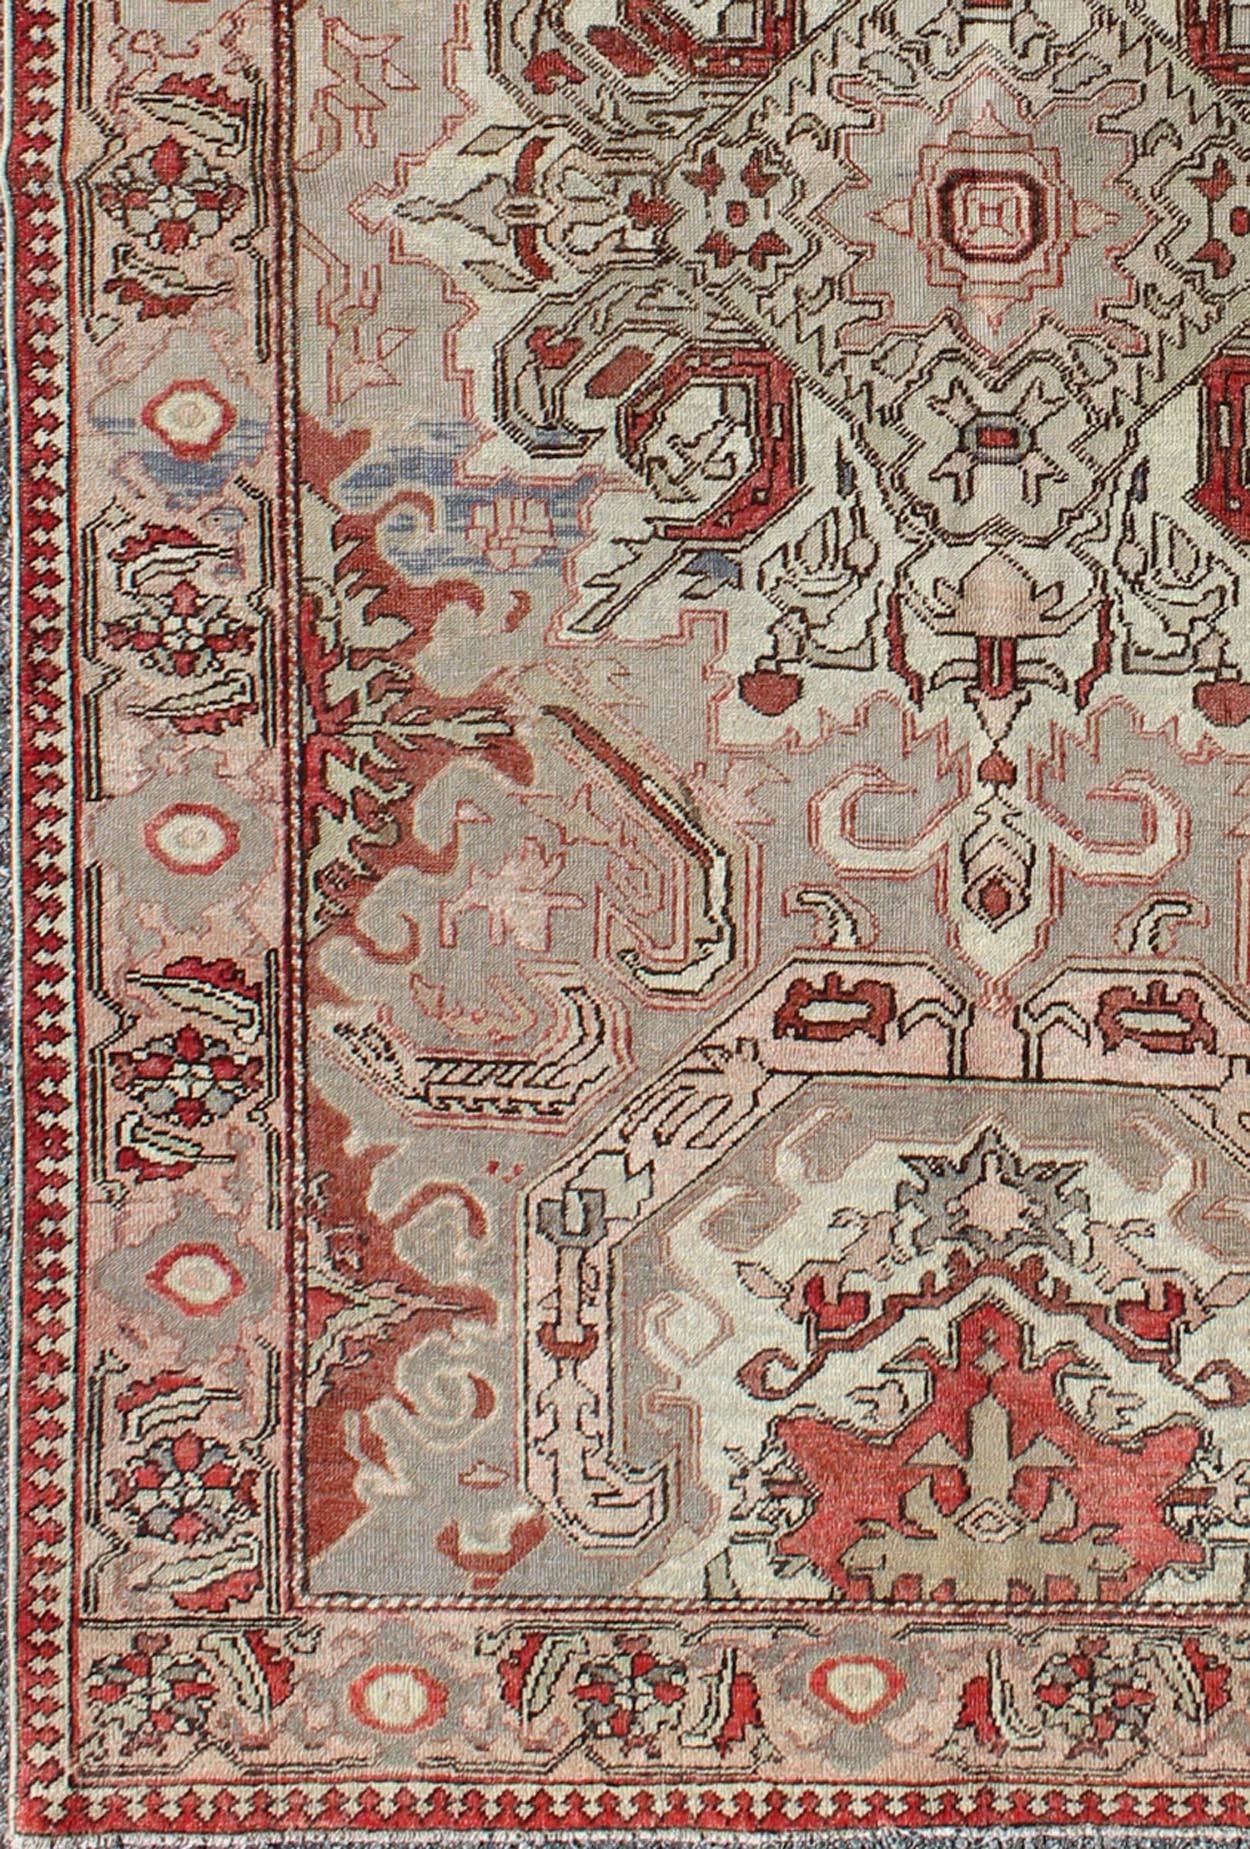 Sevas/Sivas rugs from western Anatolia are renowned for their fine weaves and intricate designs. Set on a taupe and warm grey background, this outstanding small rug displays a variety of reds, pale green and soft pink, with highlights of grey and